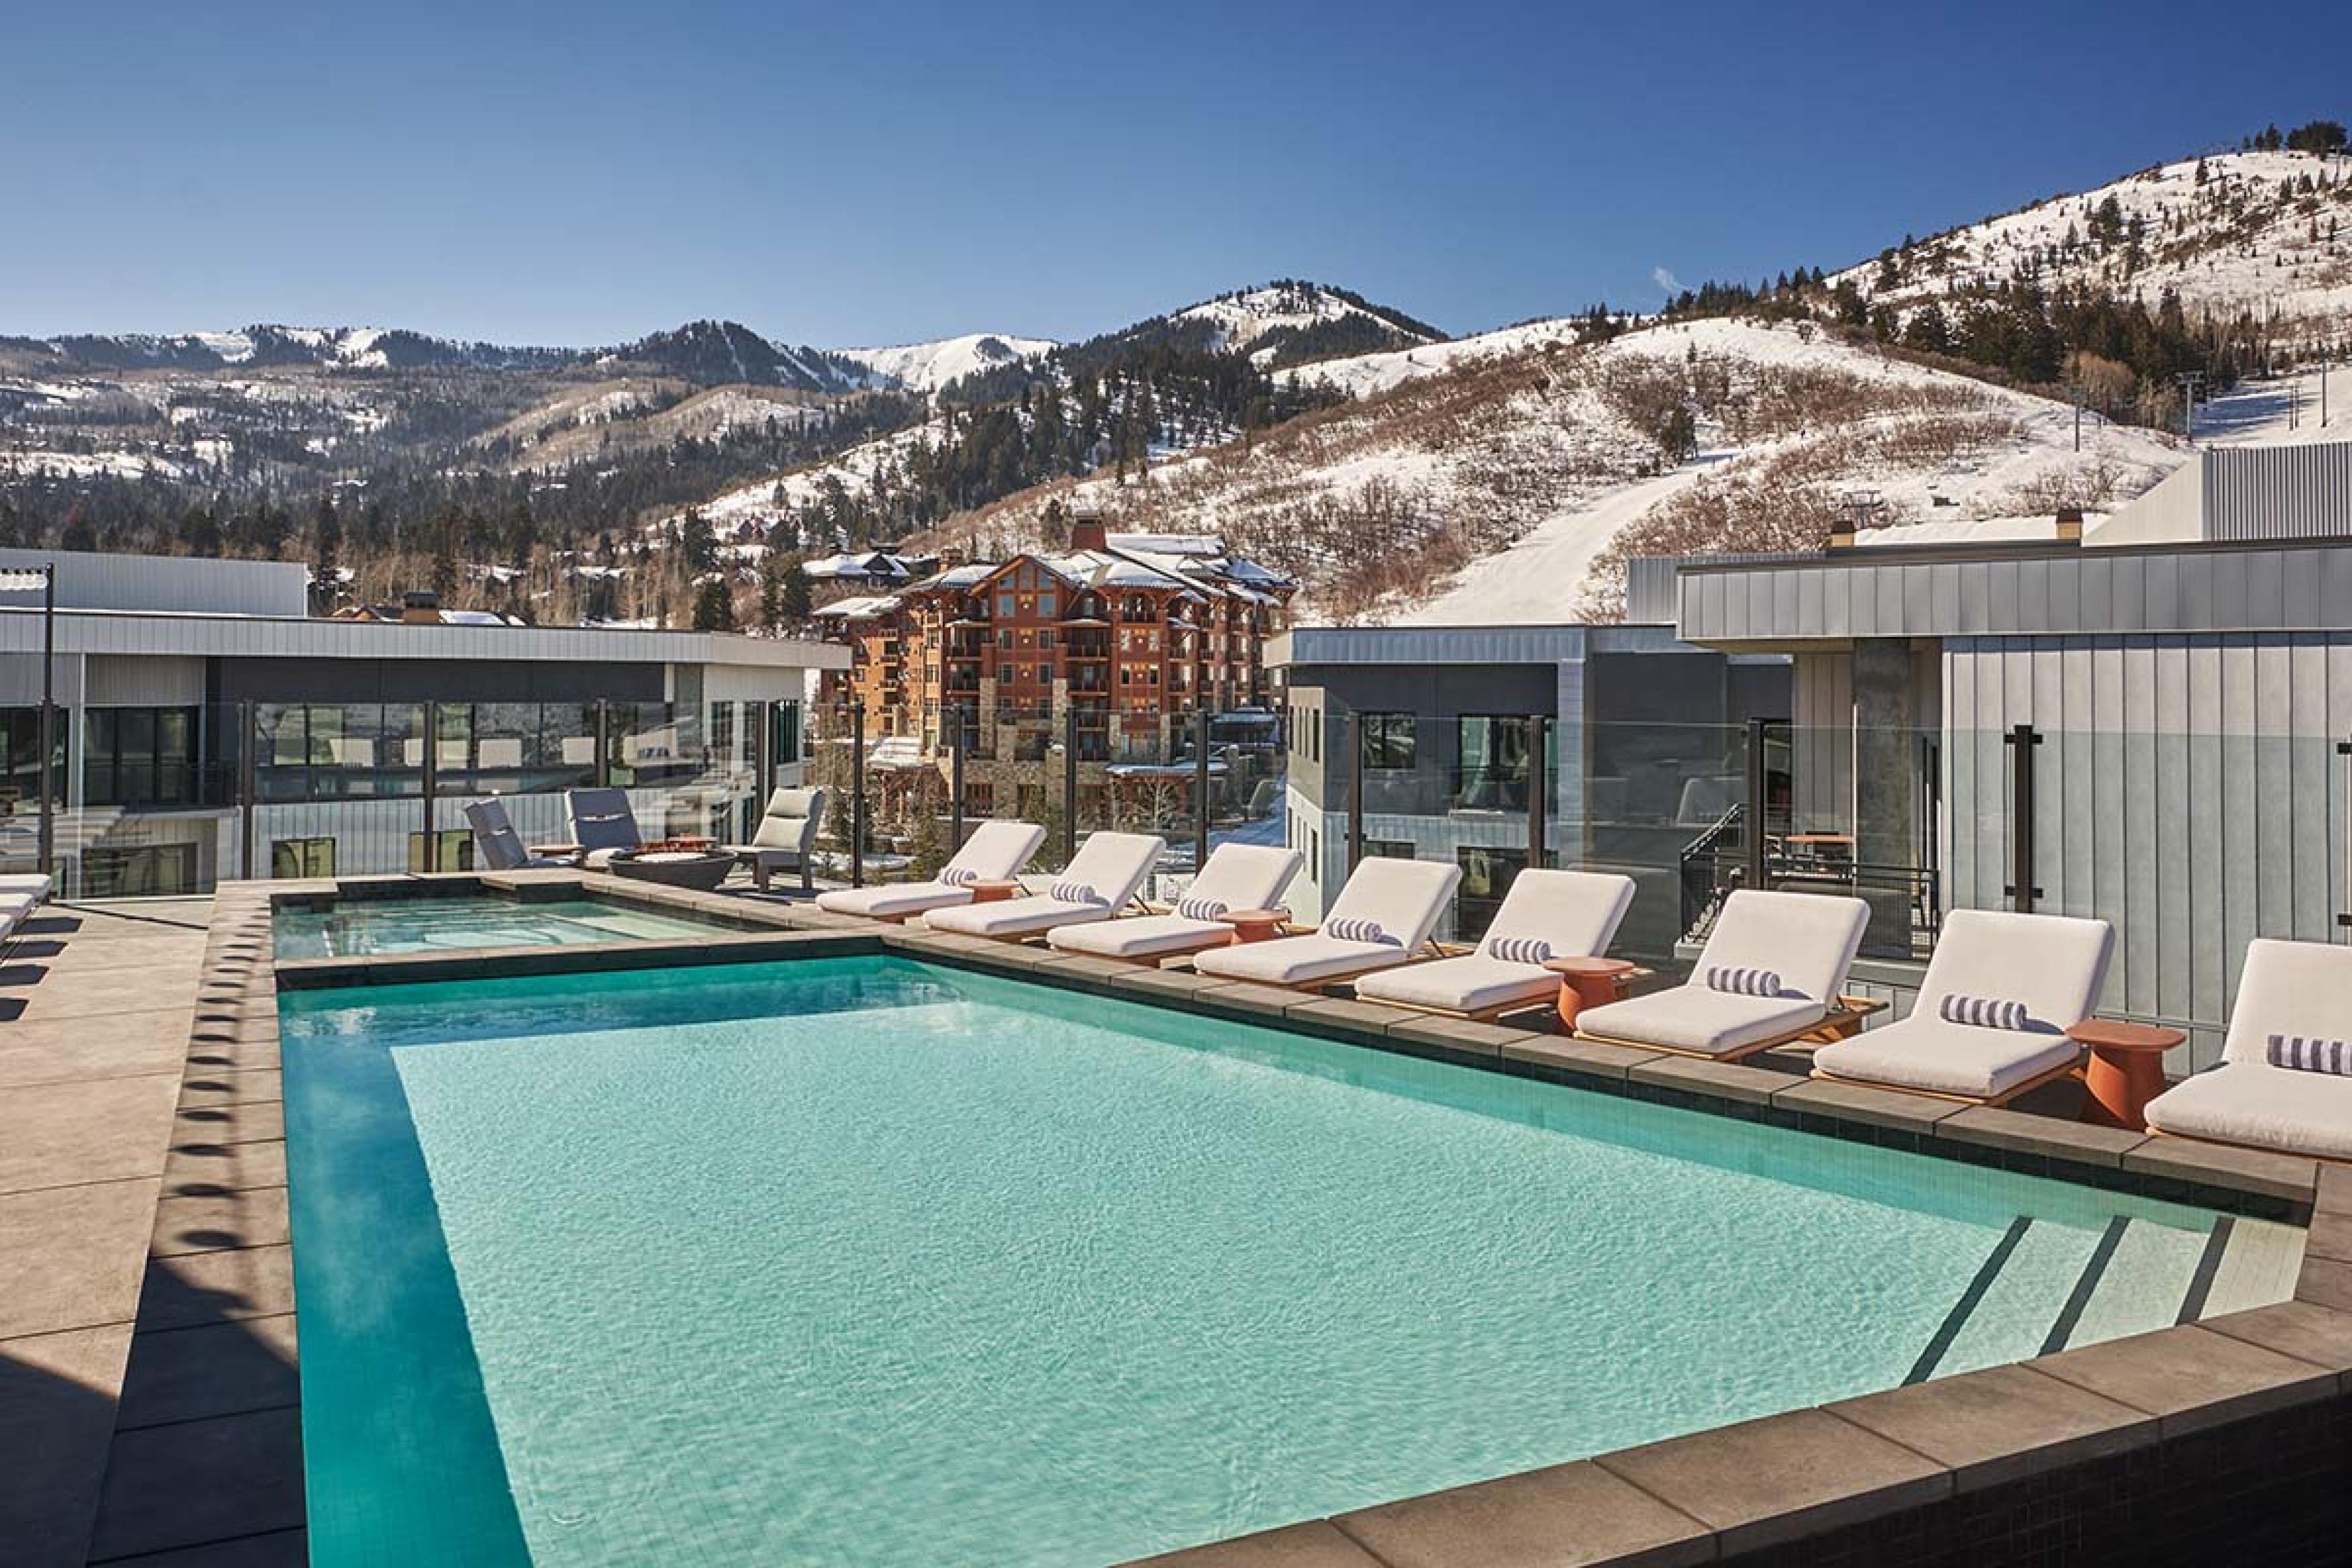 pool and hot tub lined with wide chairs looking out on snowy mountains